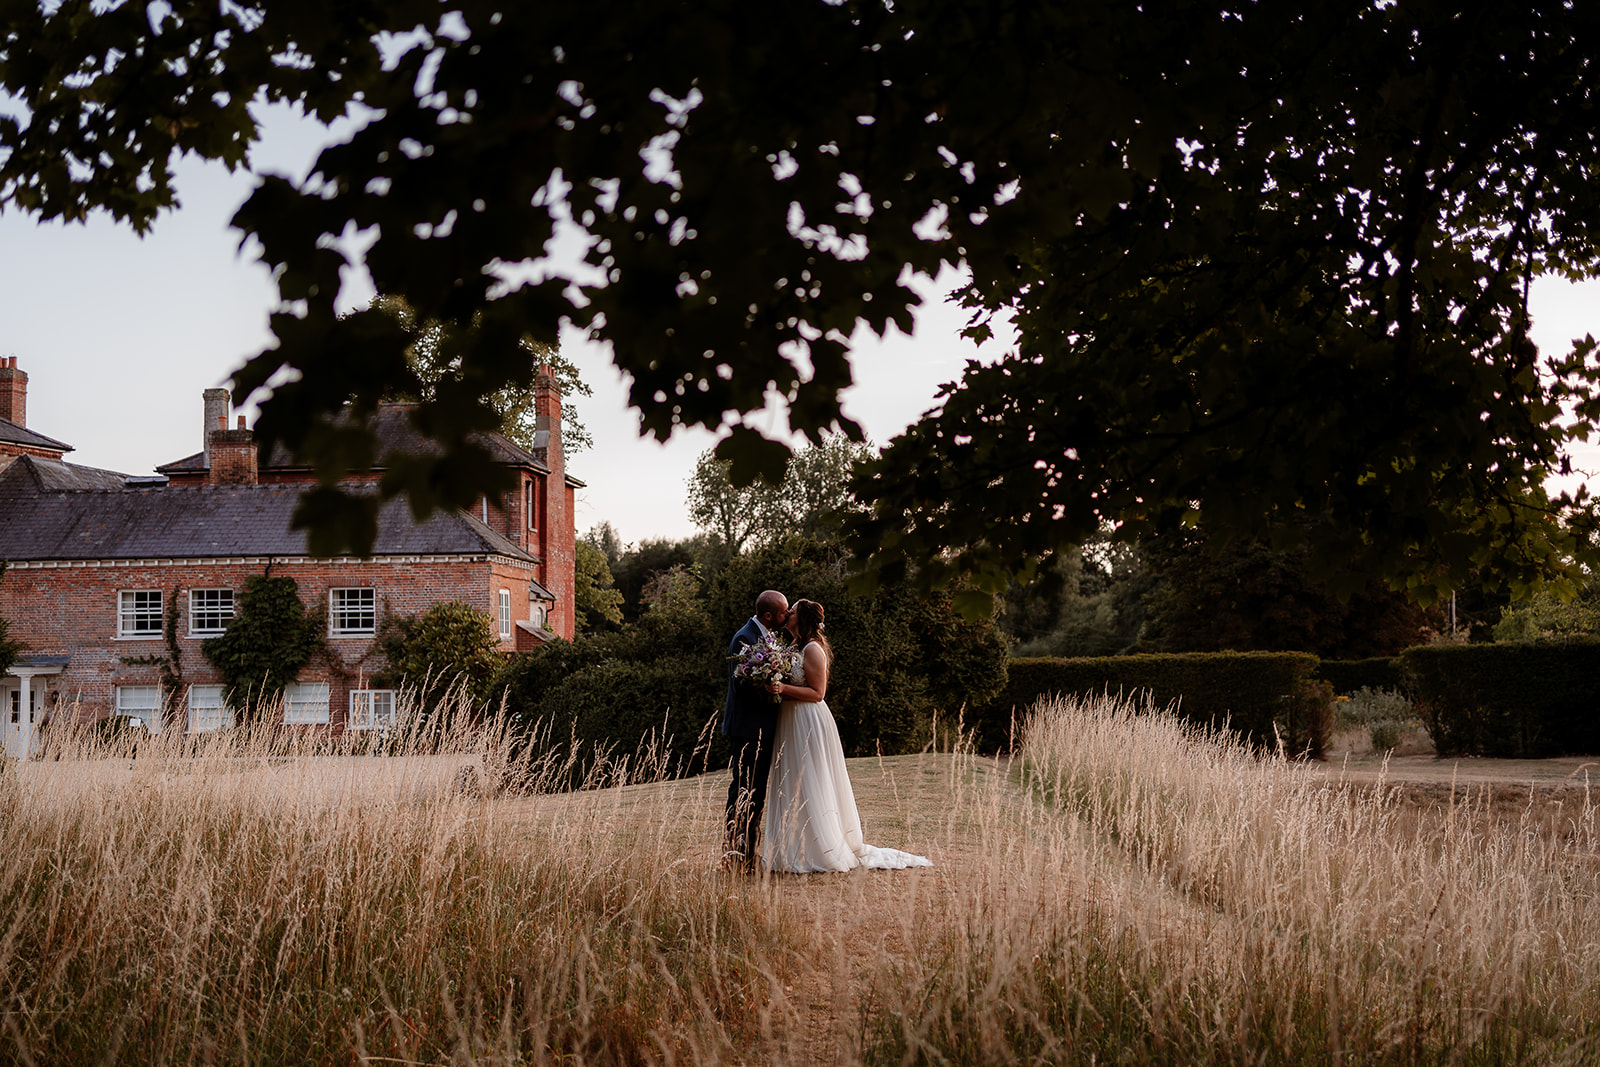 Golden hour couple photos at Syrencot wedding venue